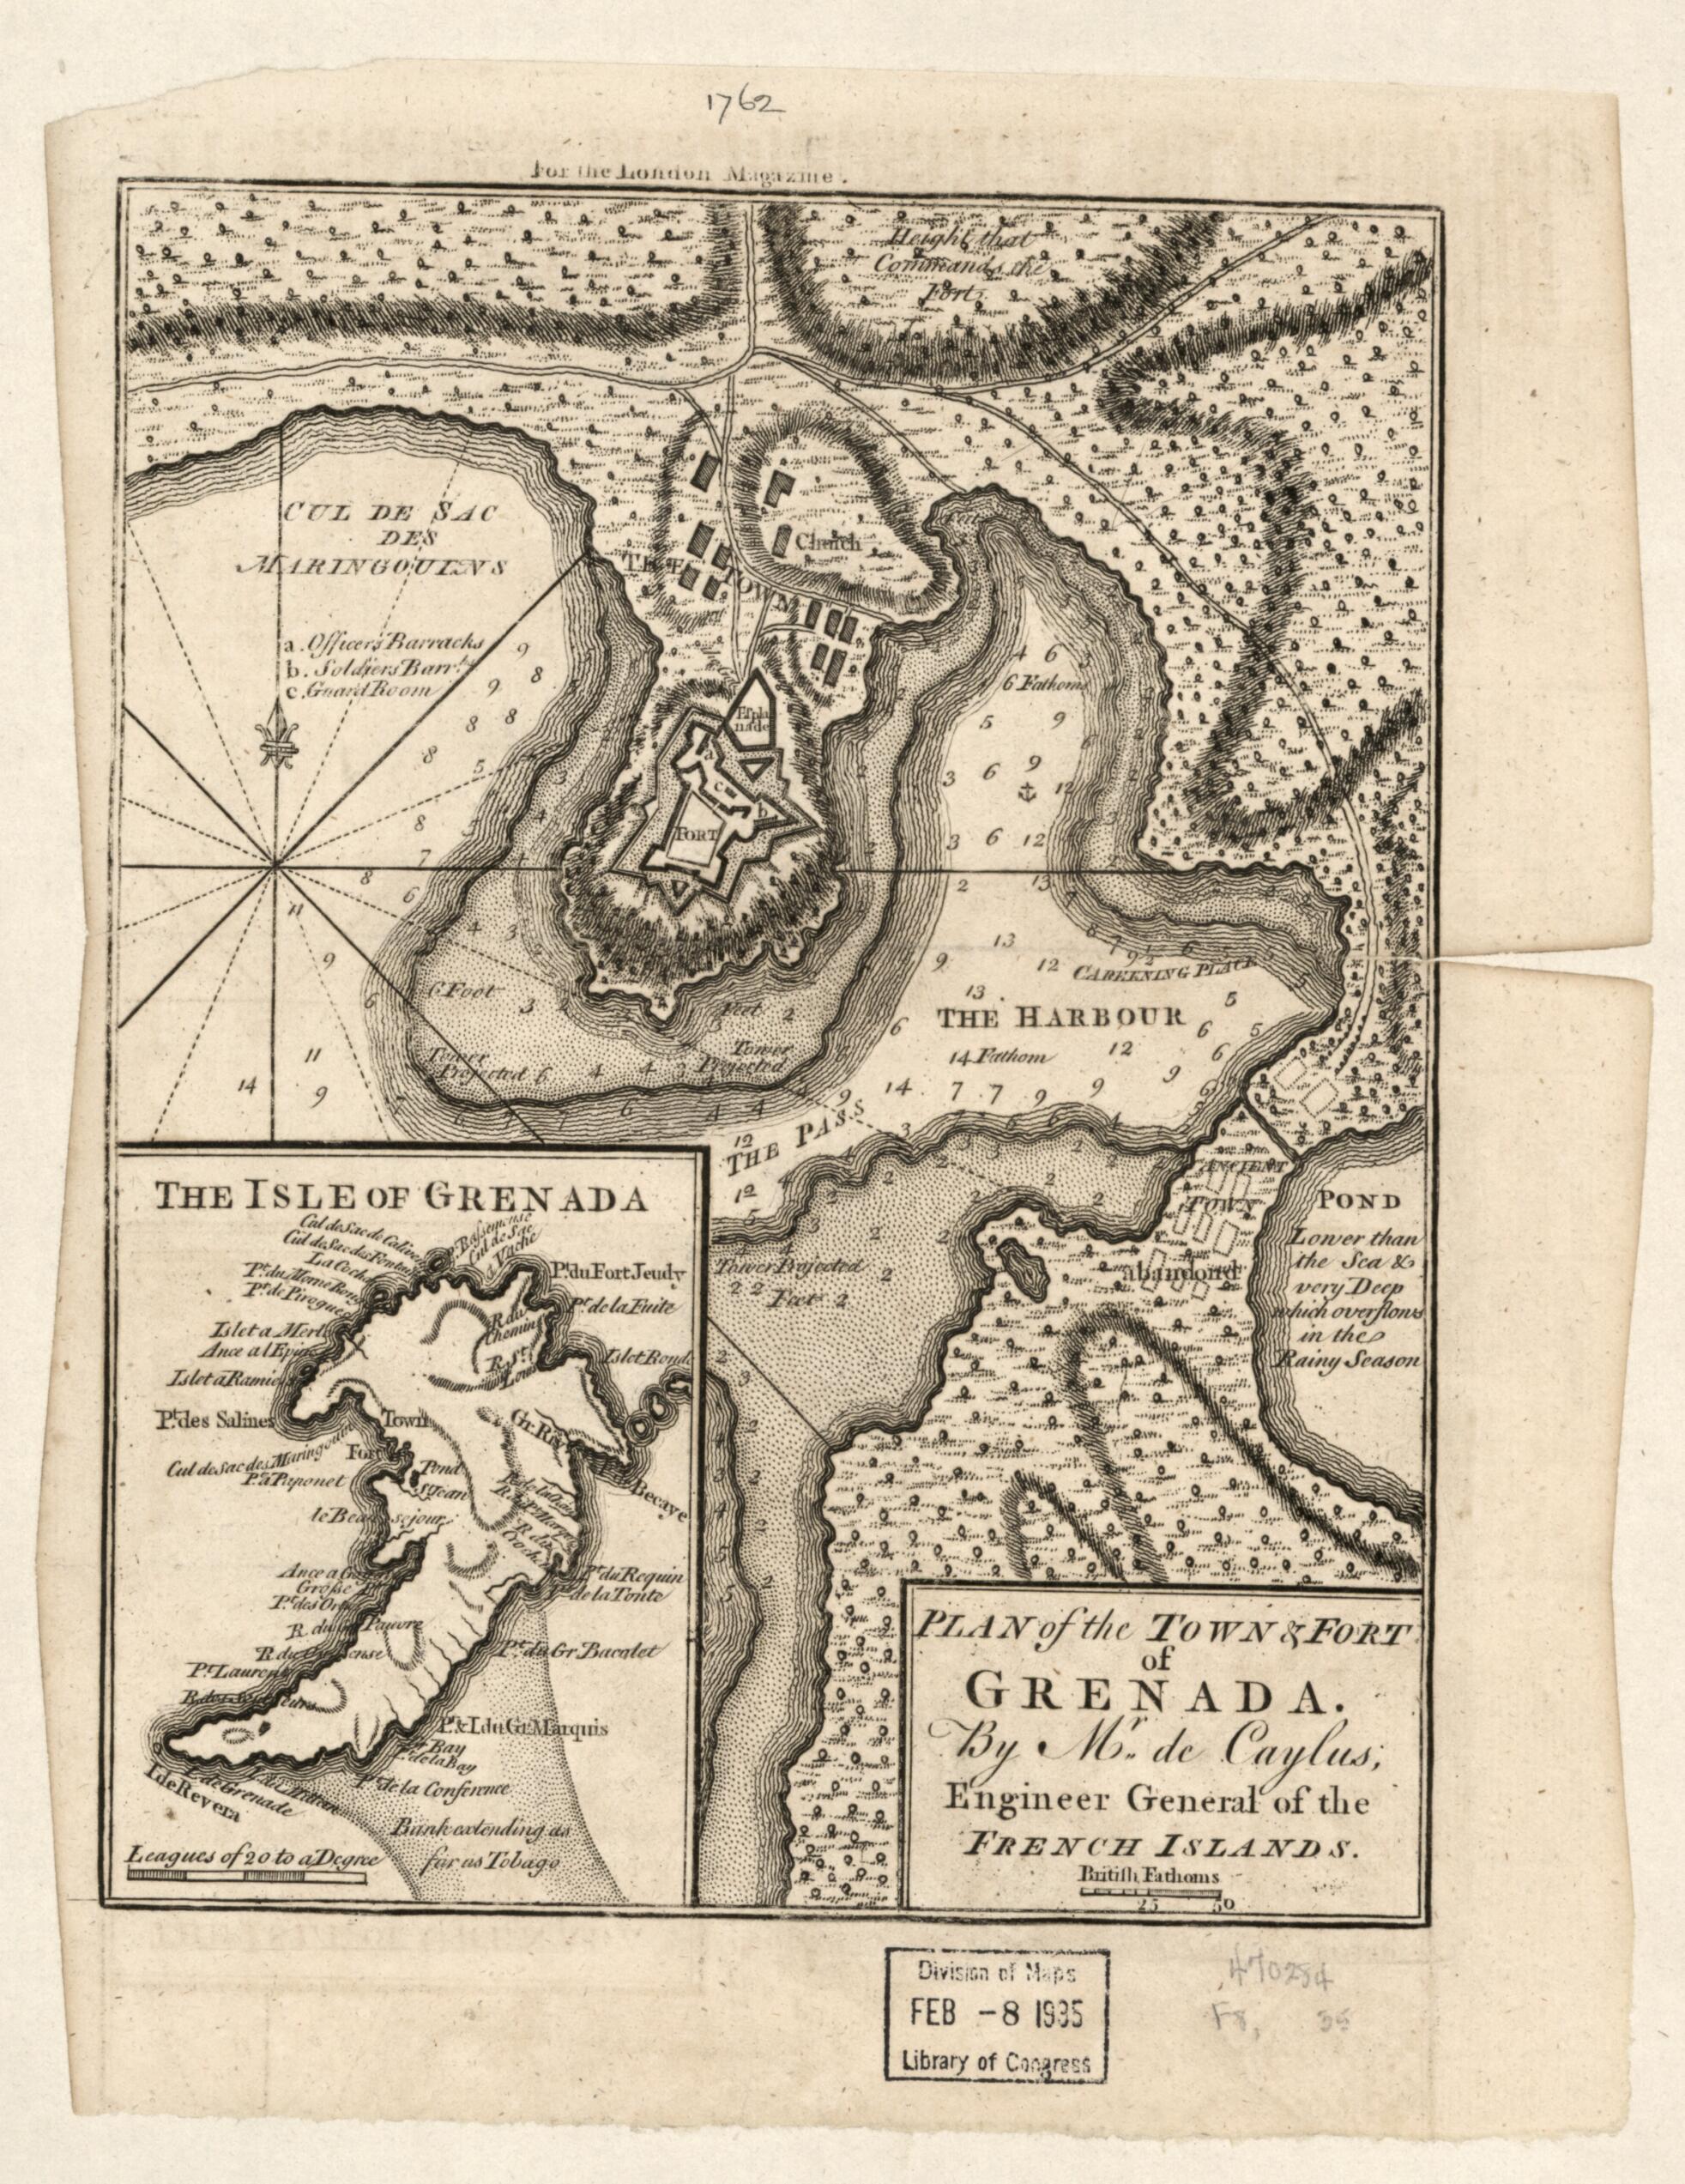 This old map of Plan of the Town &amp; Fort of Grenada from 1762 was created by DE Caylus in 1762